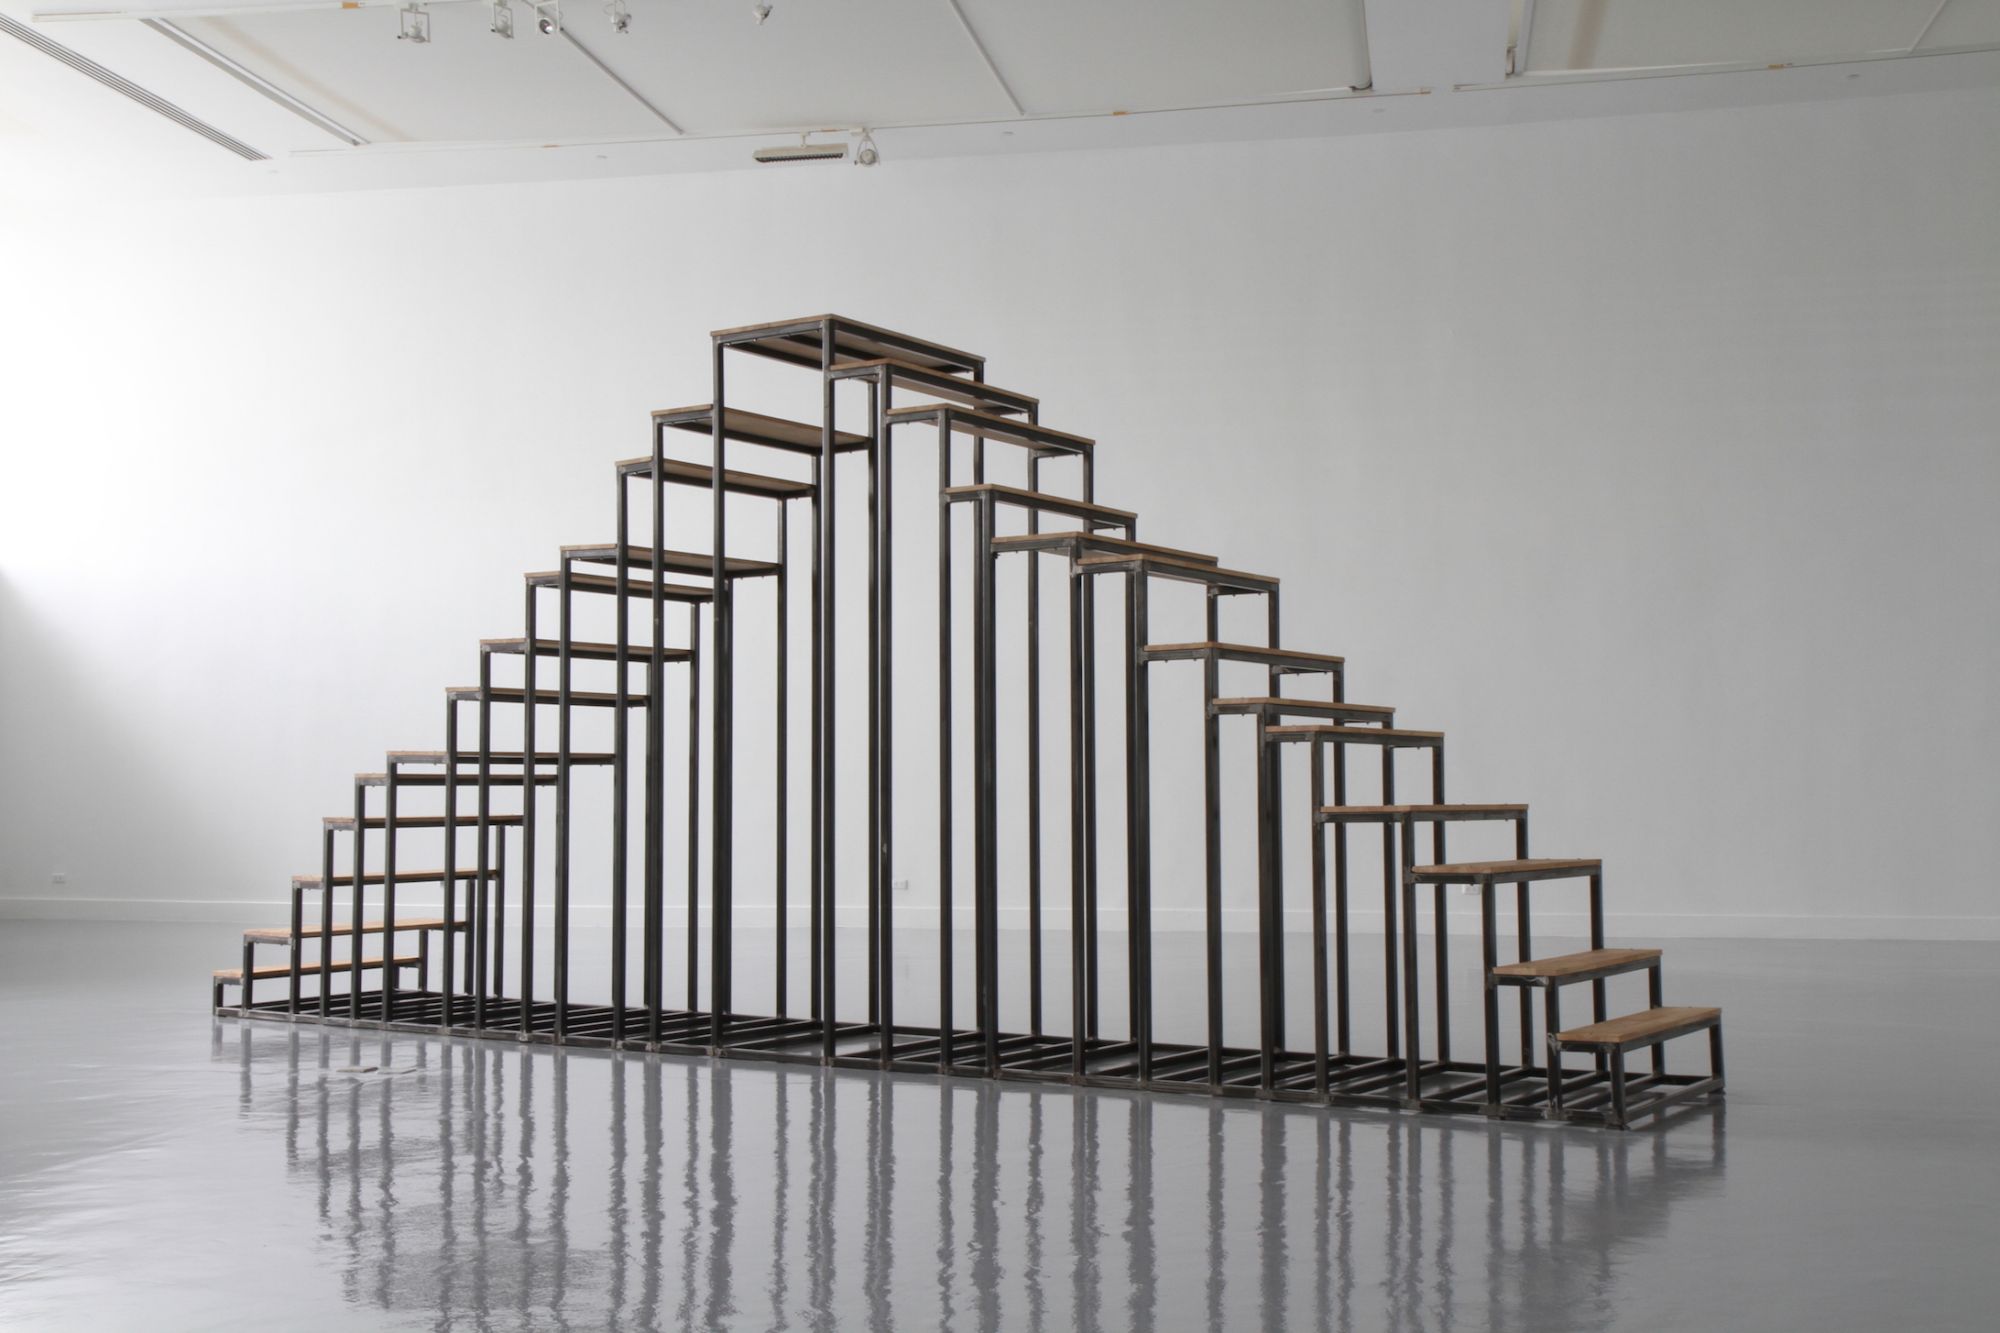 Hill_steel and rubber wood_664x110x290cm_2014